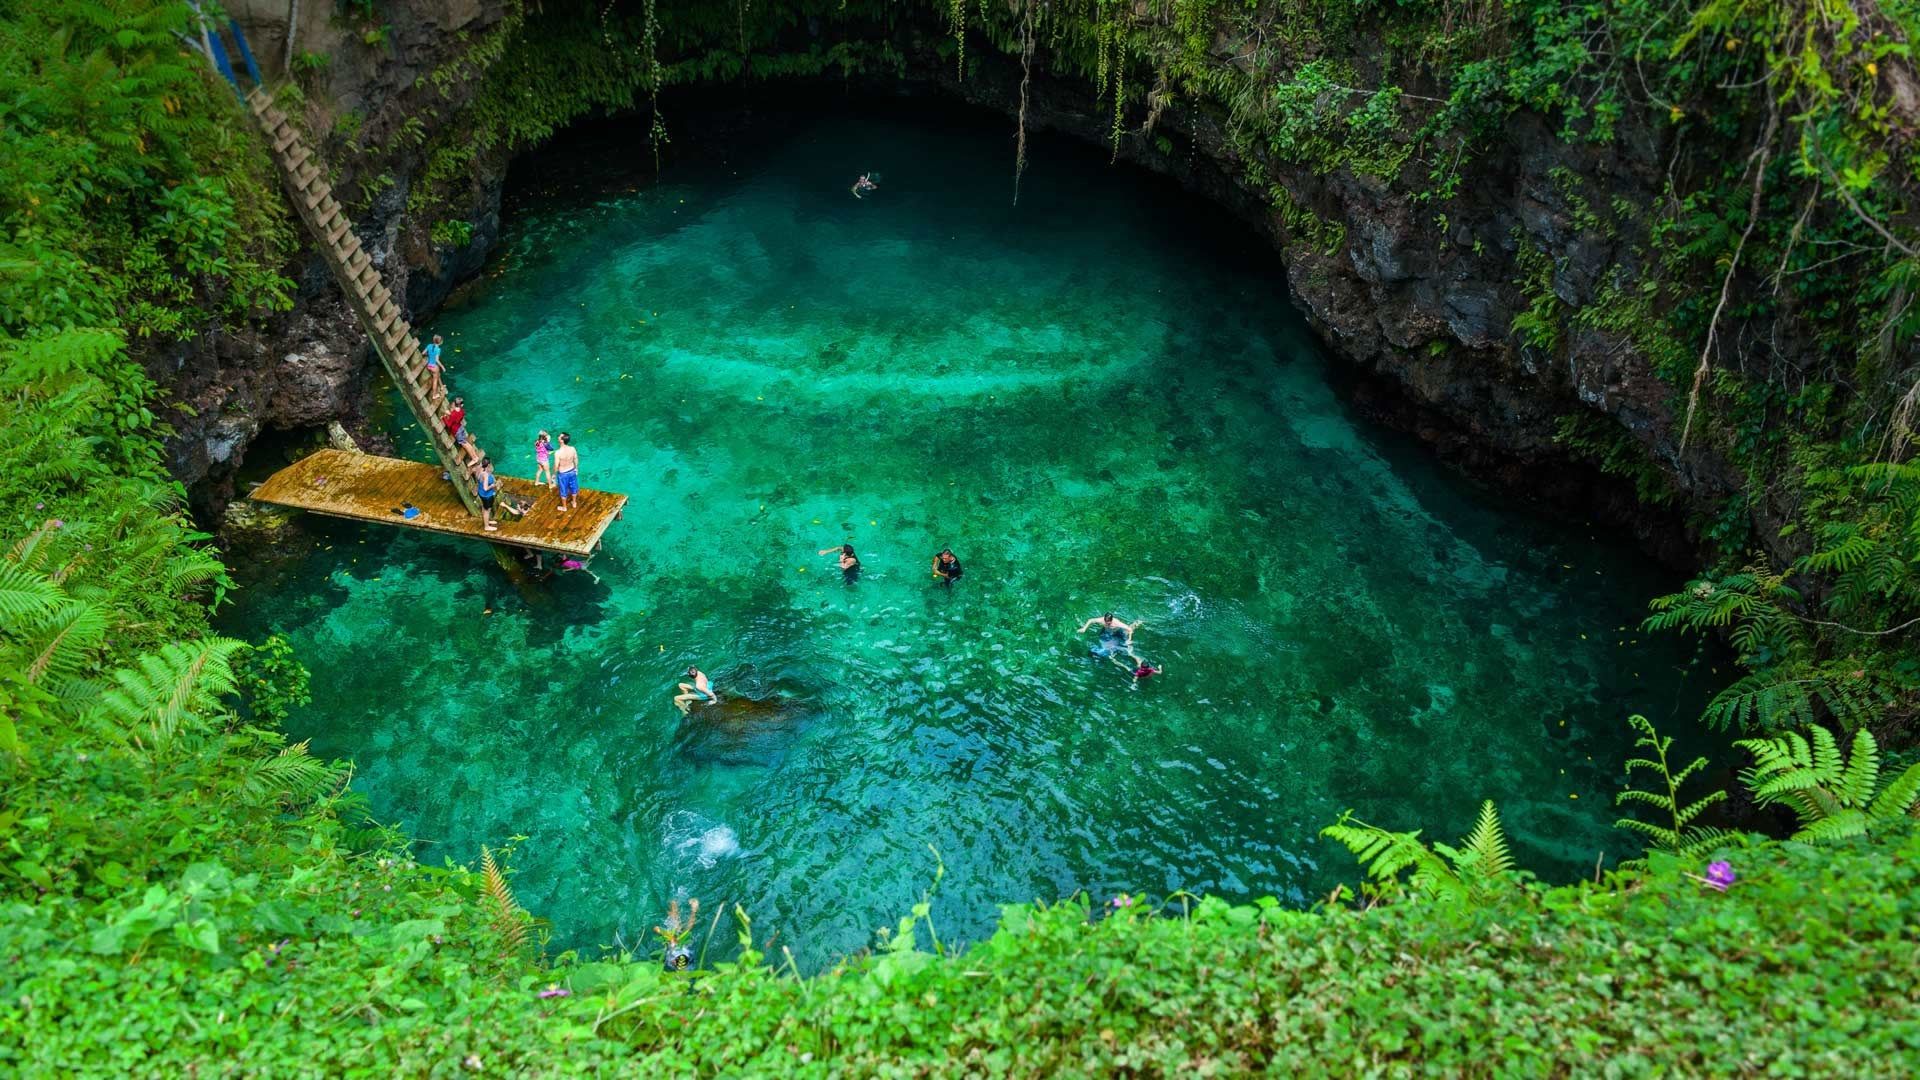 Wallpaper To Sua Ocean Trench in Samoa 1920x1080 Full HD 2K Picture, Image